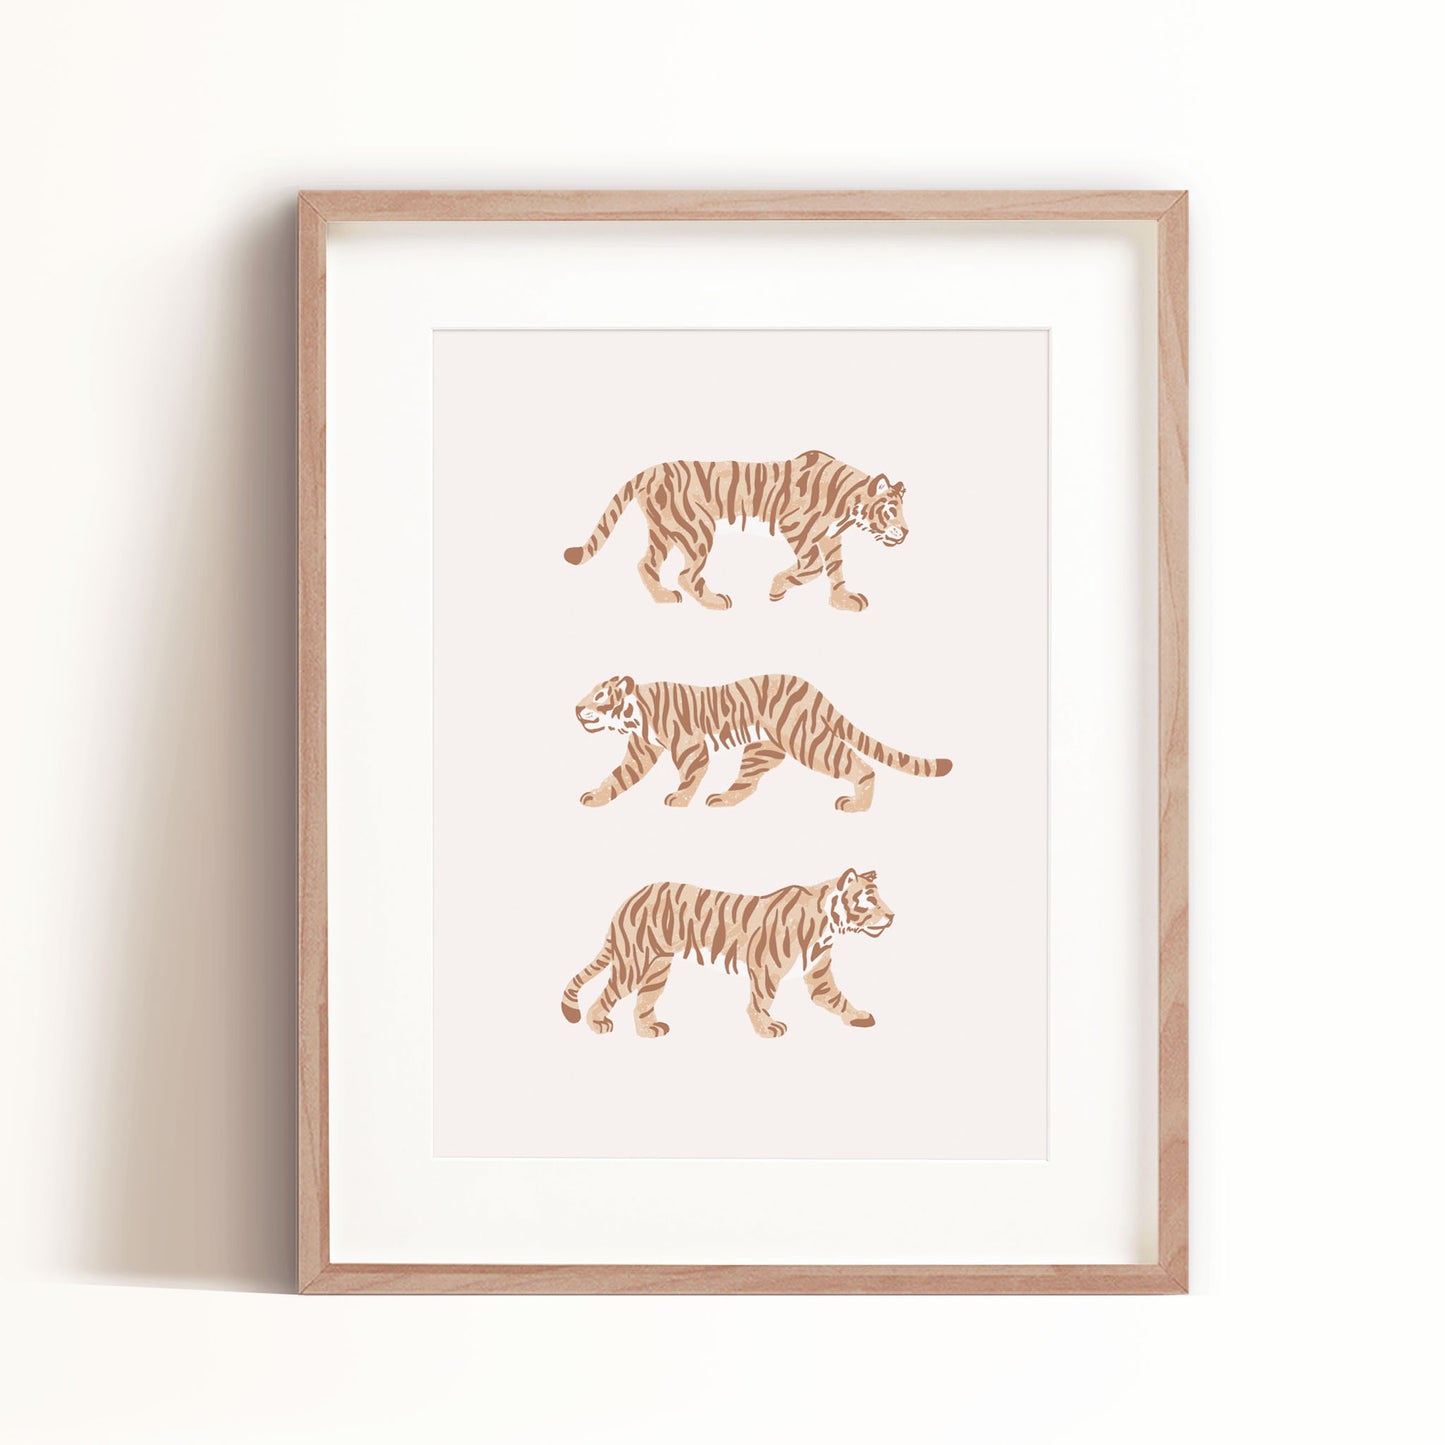 Three Tigers art print in tan is great for kids spaces